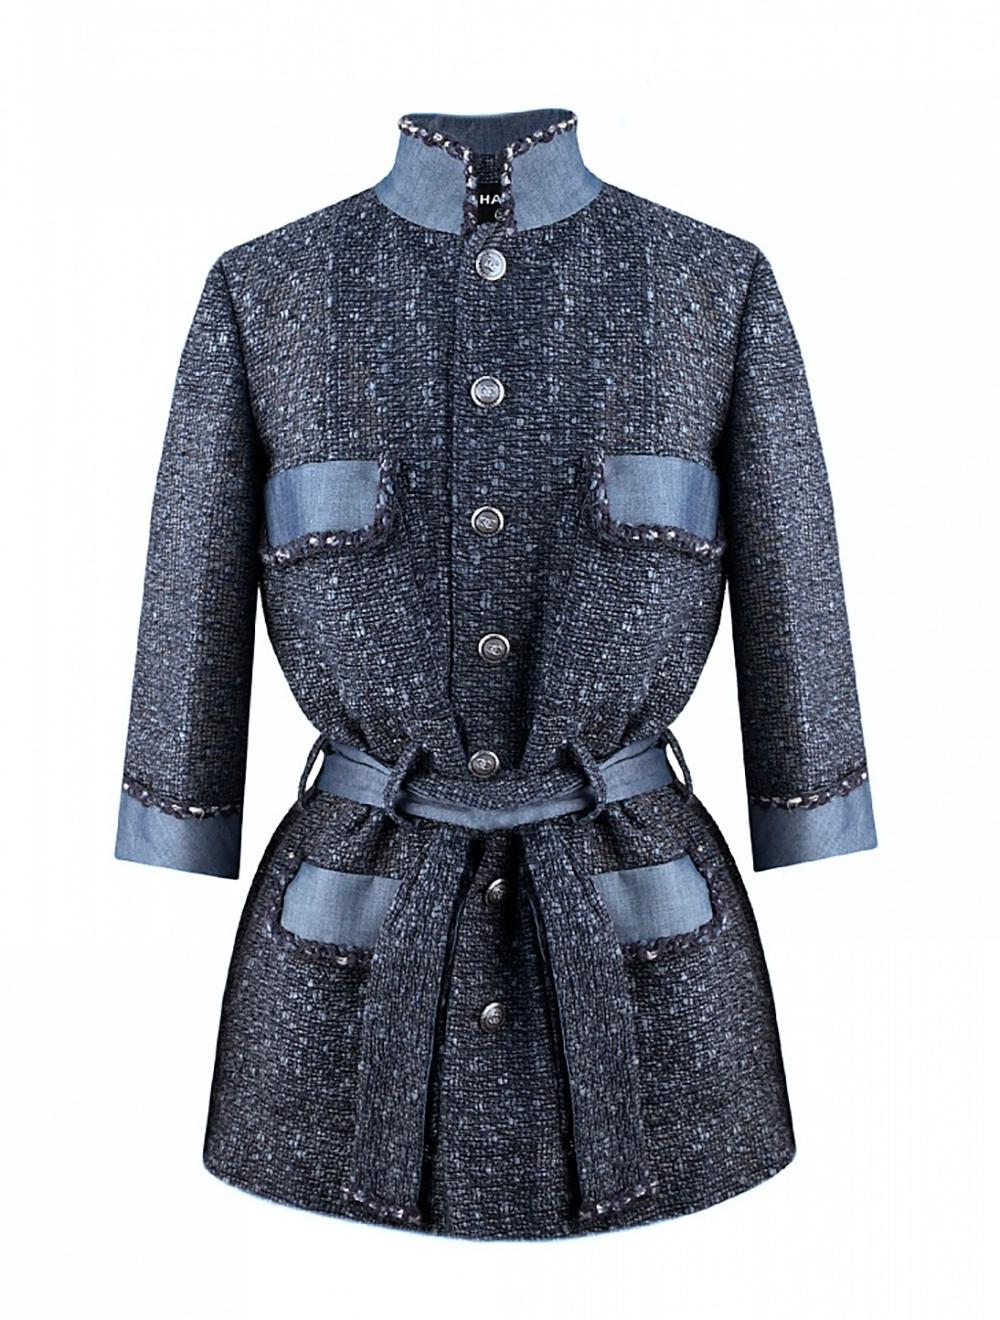 Chanel CC Buttons Belted Tweed Jacket In Excellent Condition For Sale In Dubai, AE